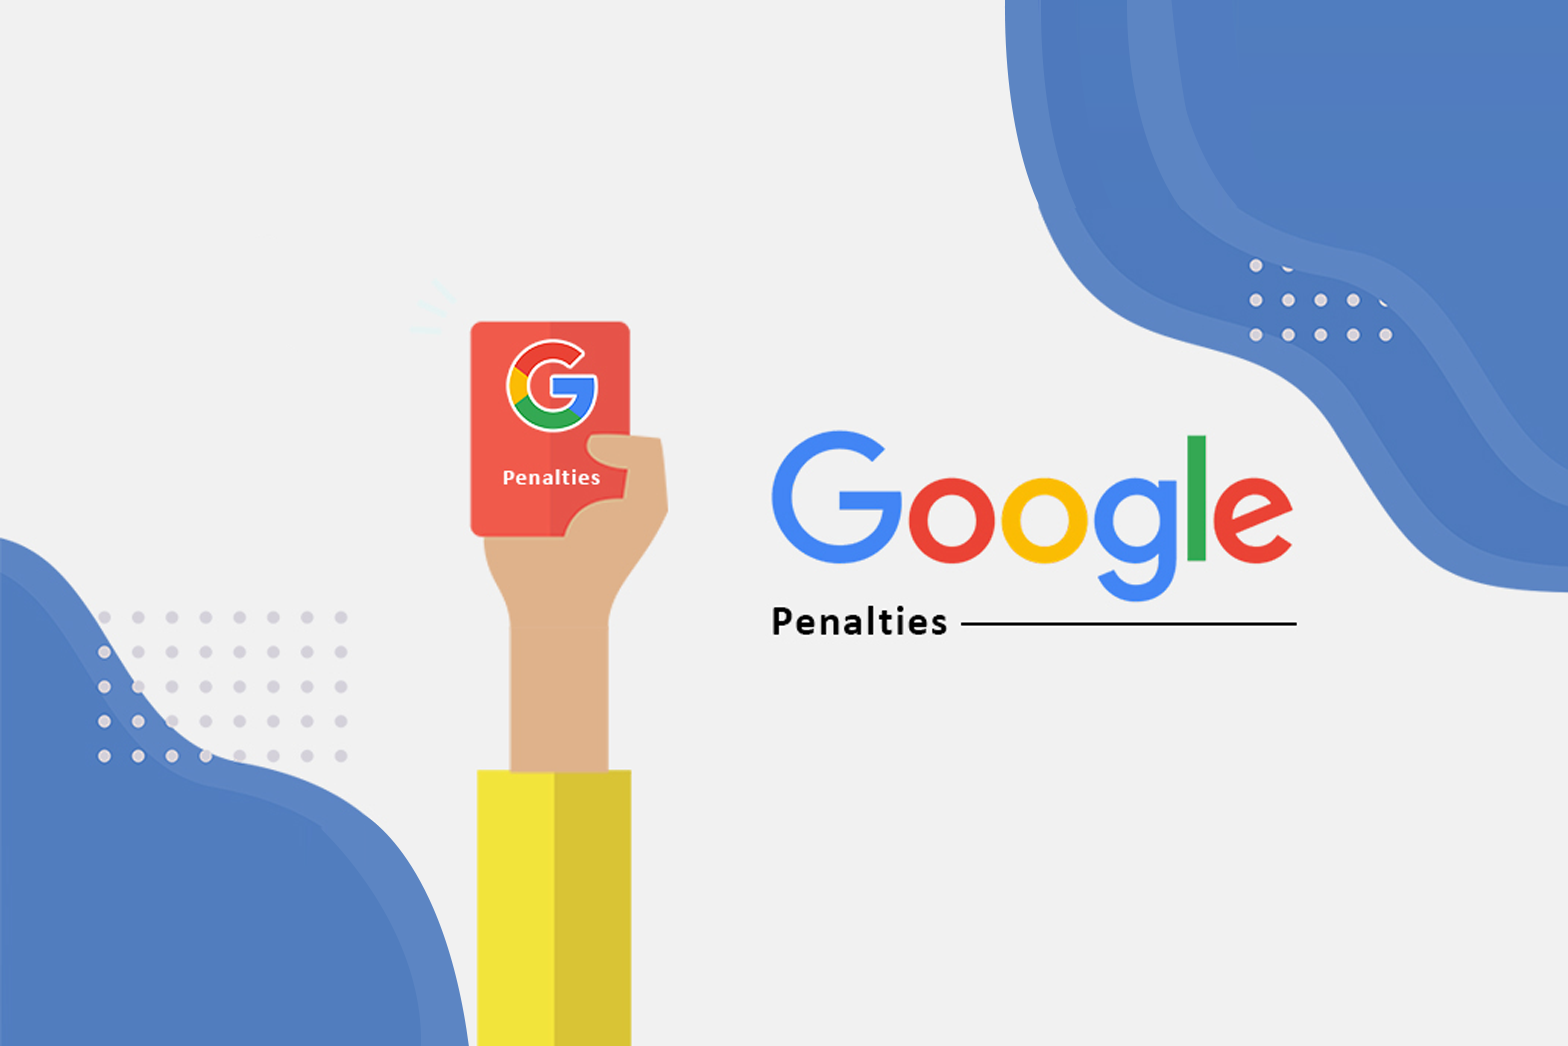 For what reasons will Google actively penalize your site?